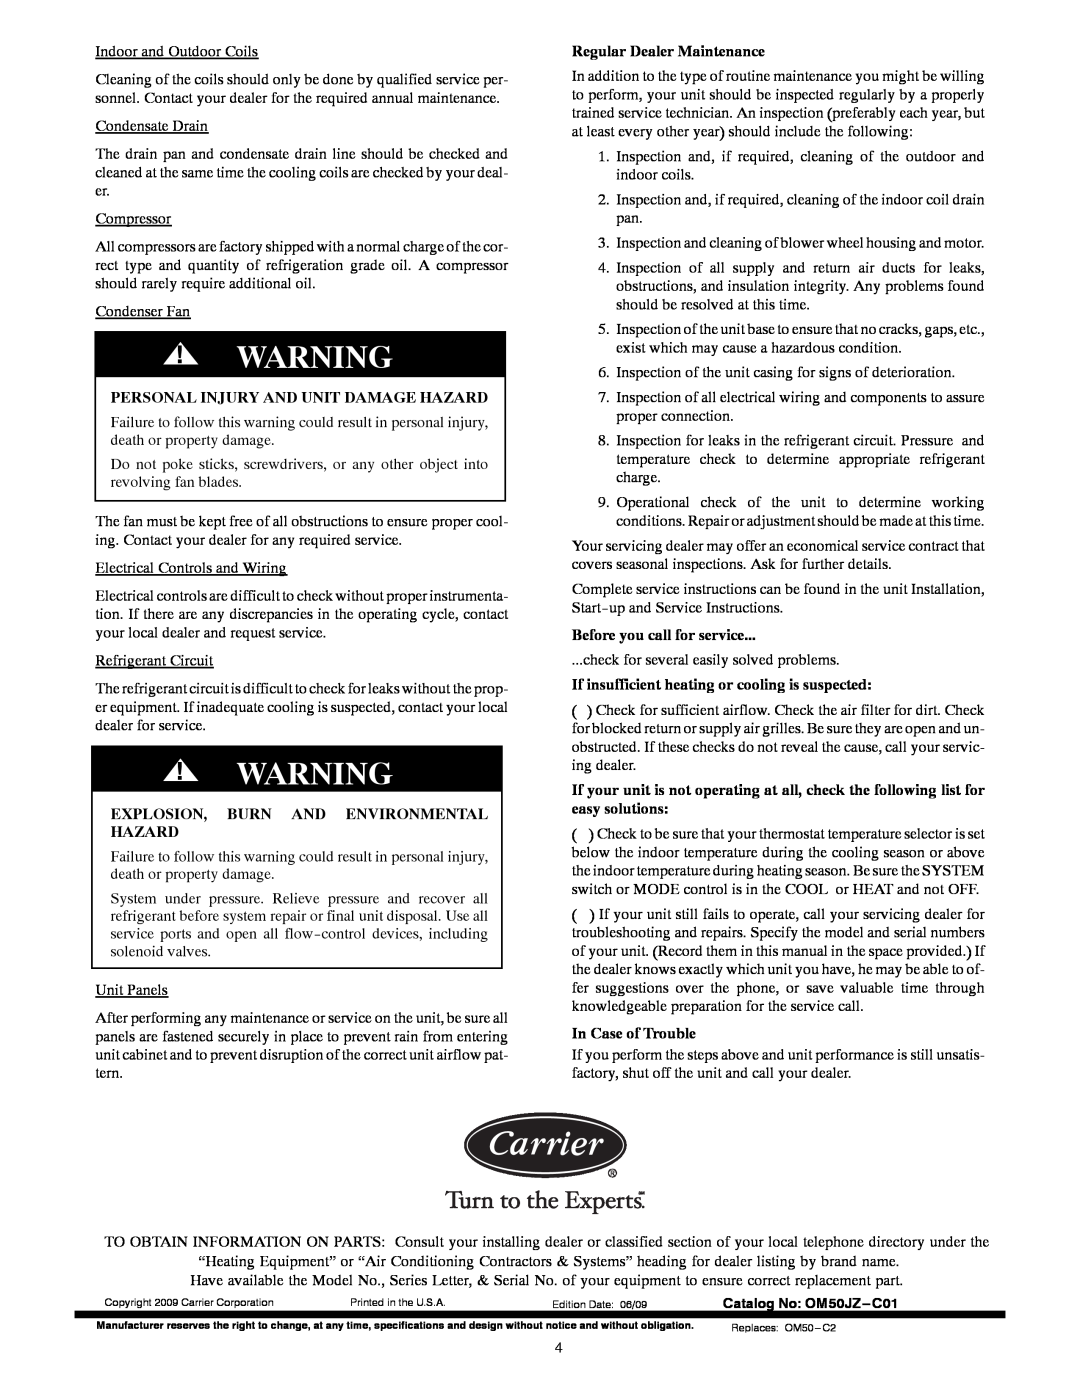 Carrier 50JZ-A manual Personal Injury And Unit Damage Hazard, Explosion, Burn And Environmental Hazard, In Case of Trouble 